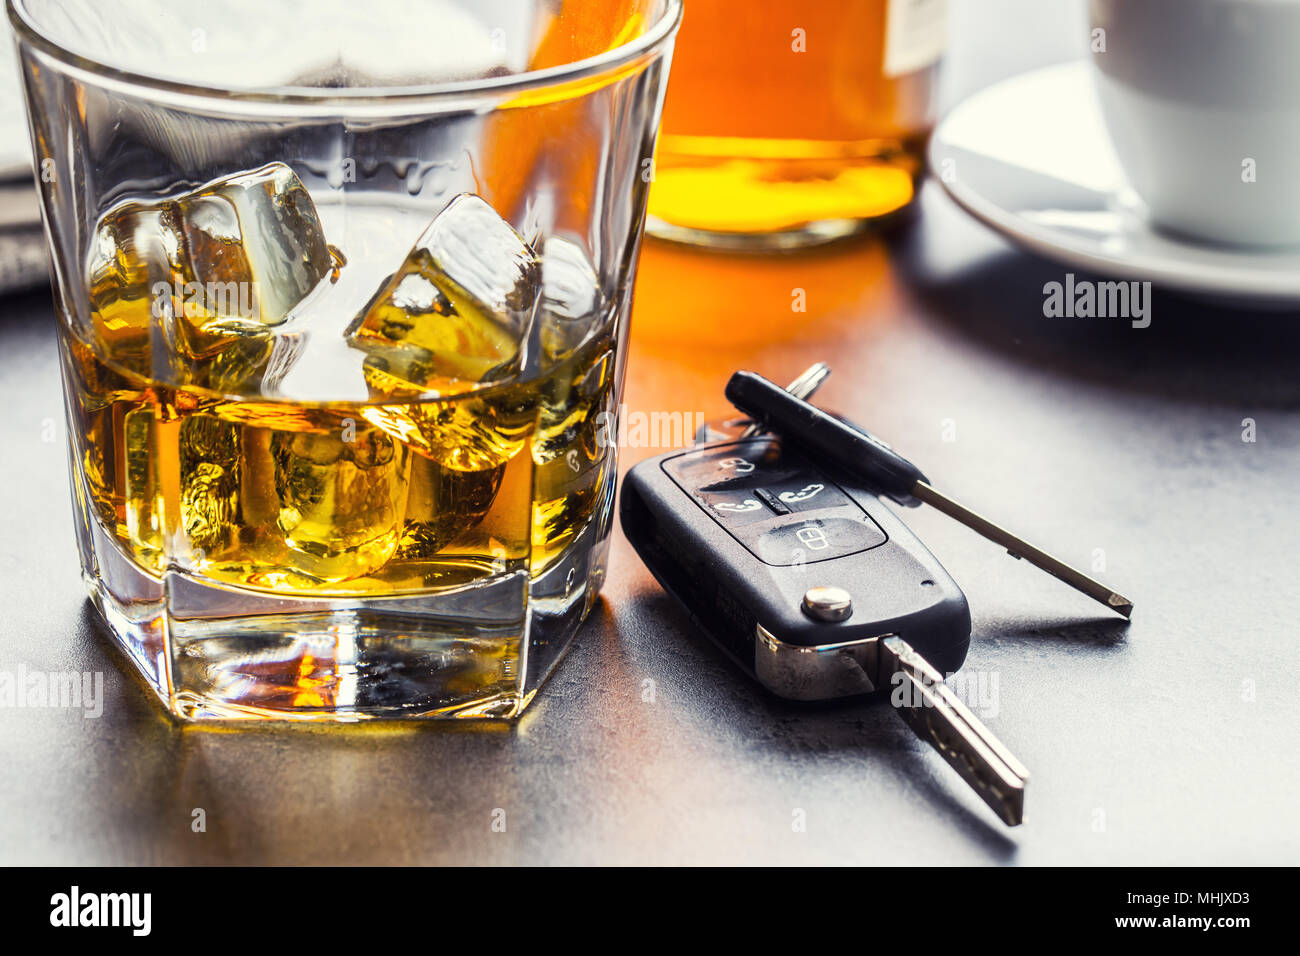 Car keys and glass of alcohol on table in pub or restaurant. Stock Photo